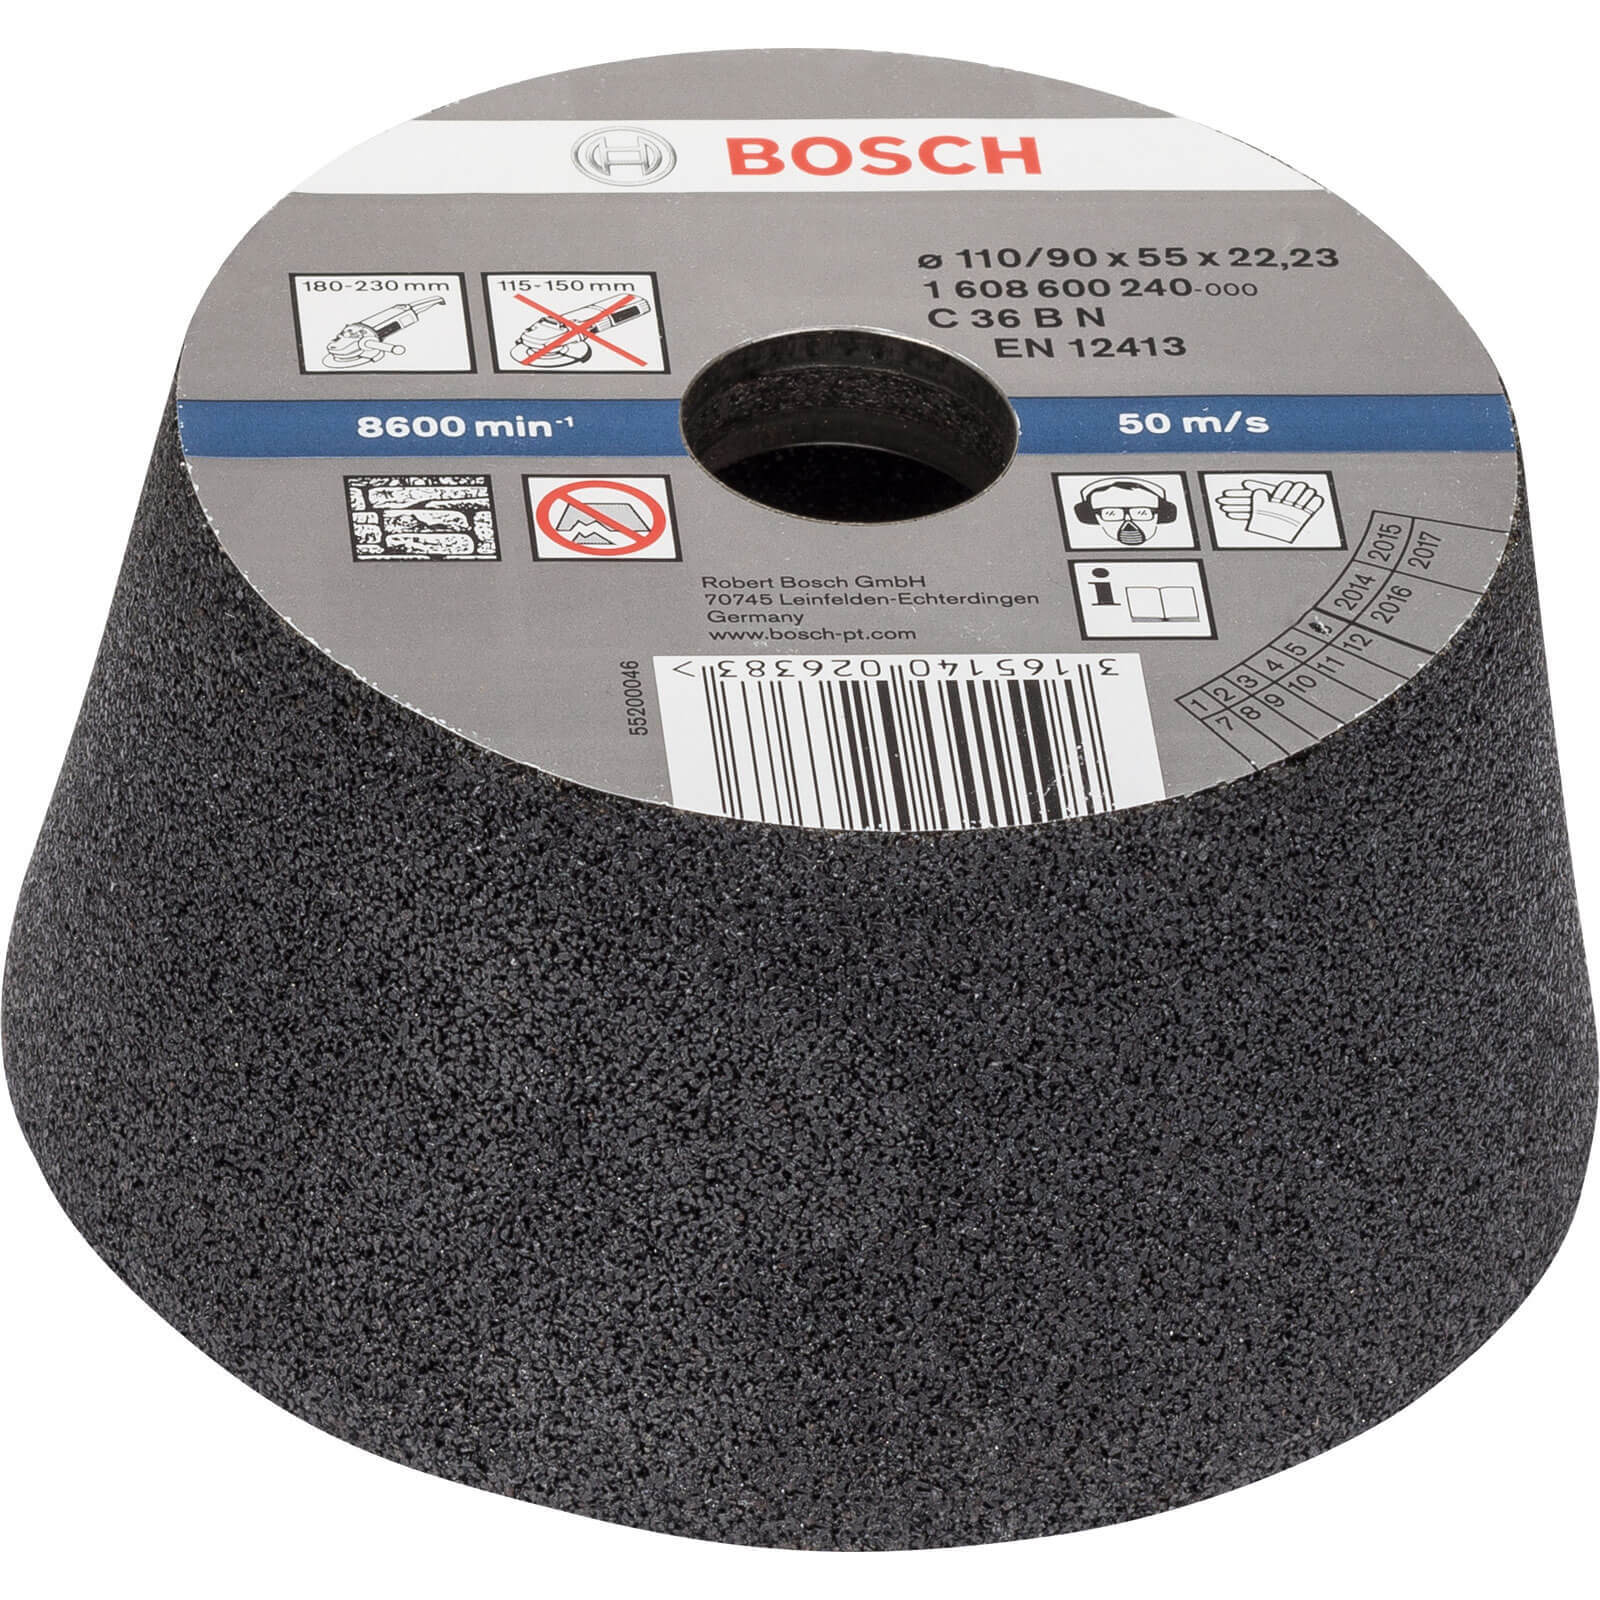 Photos - Power Tool Accessory Bosch Conical Abrasive Cup Wheel for Stone 110mm 36g 